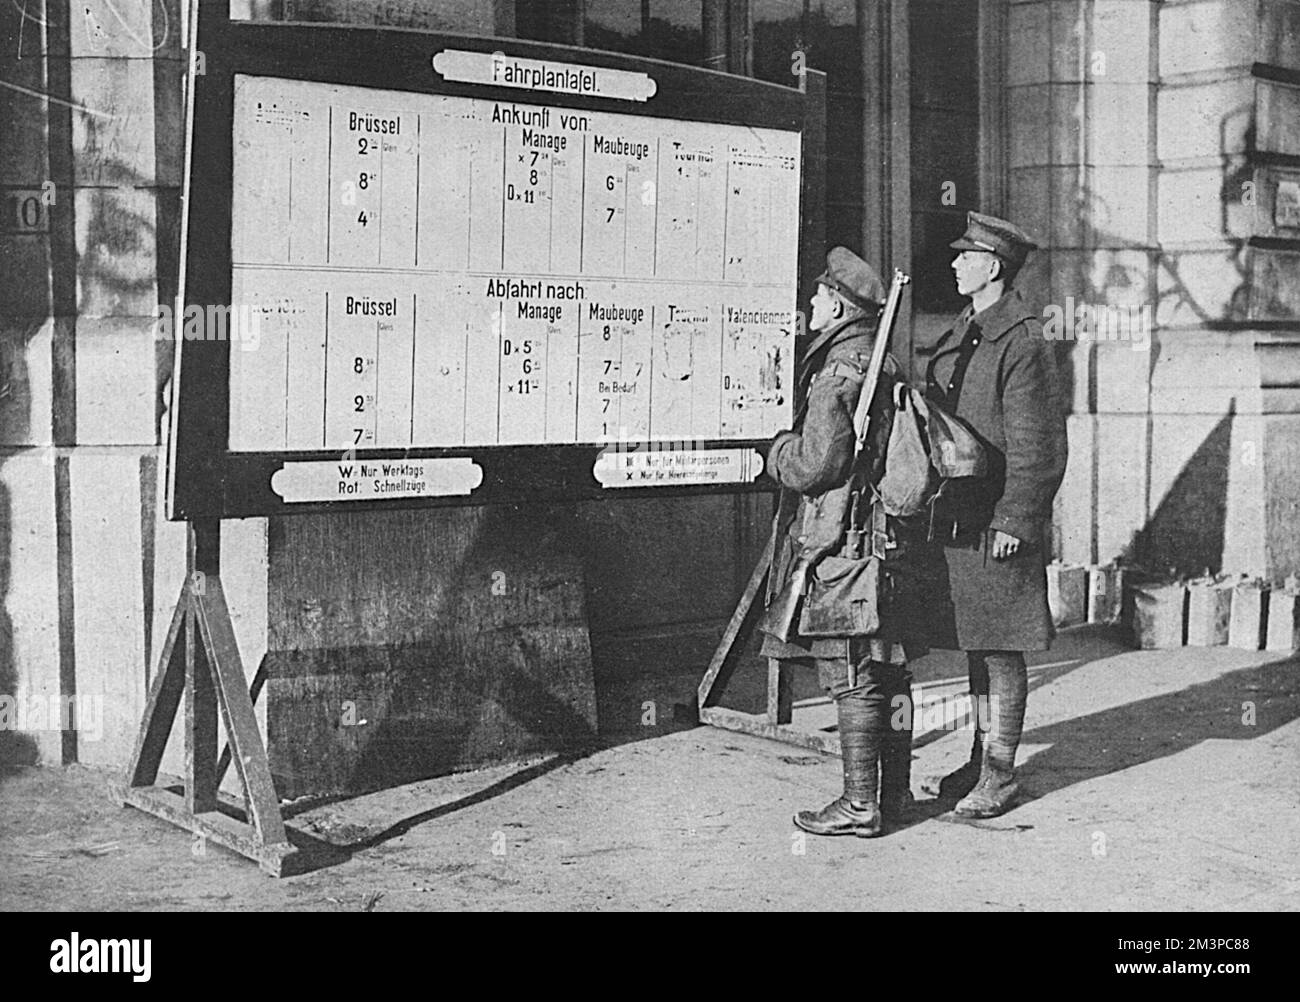 Two British soldiers stand looking at the railway timetable -written in German -  at Mons station at the end of the First World War.  Places such as Tournai and Valenciennes, which had been captured by the Allies had been removed from the board.     Date: 1918 Stock Photo